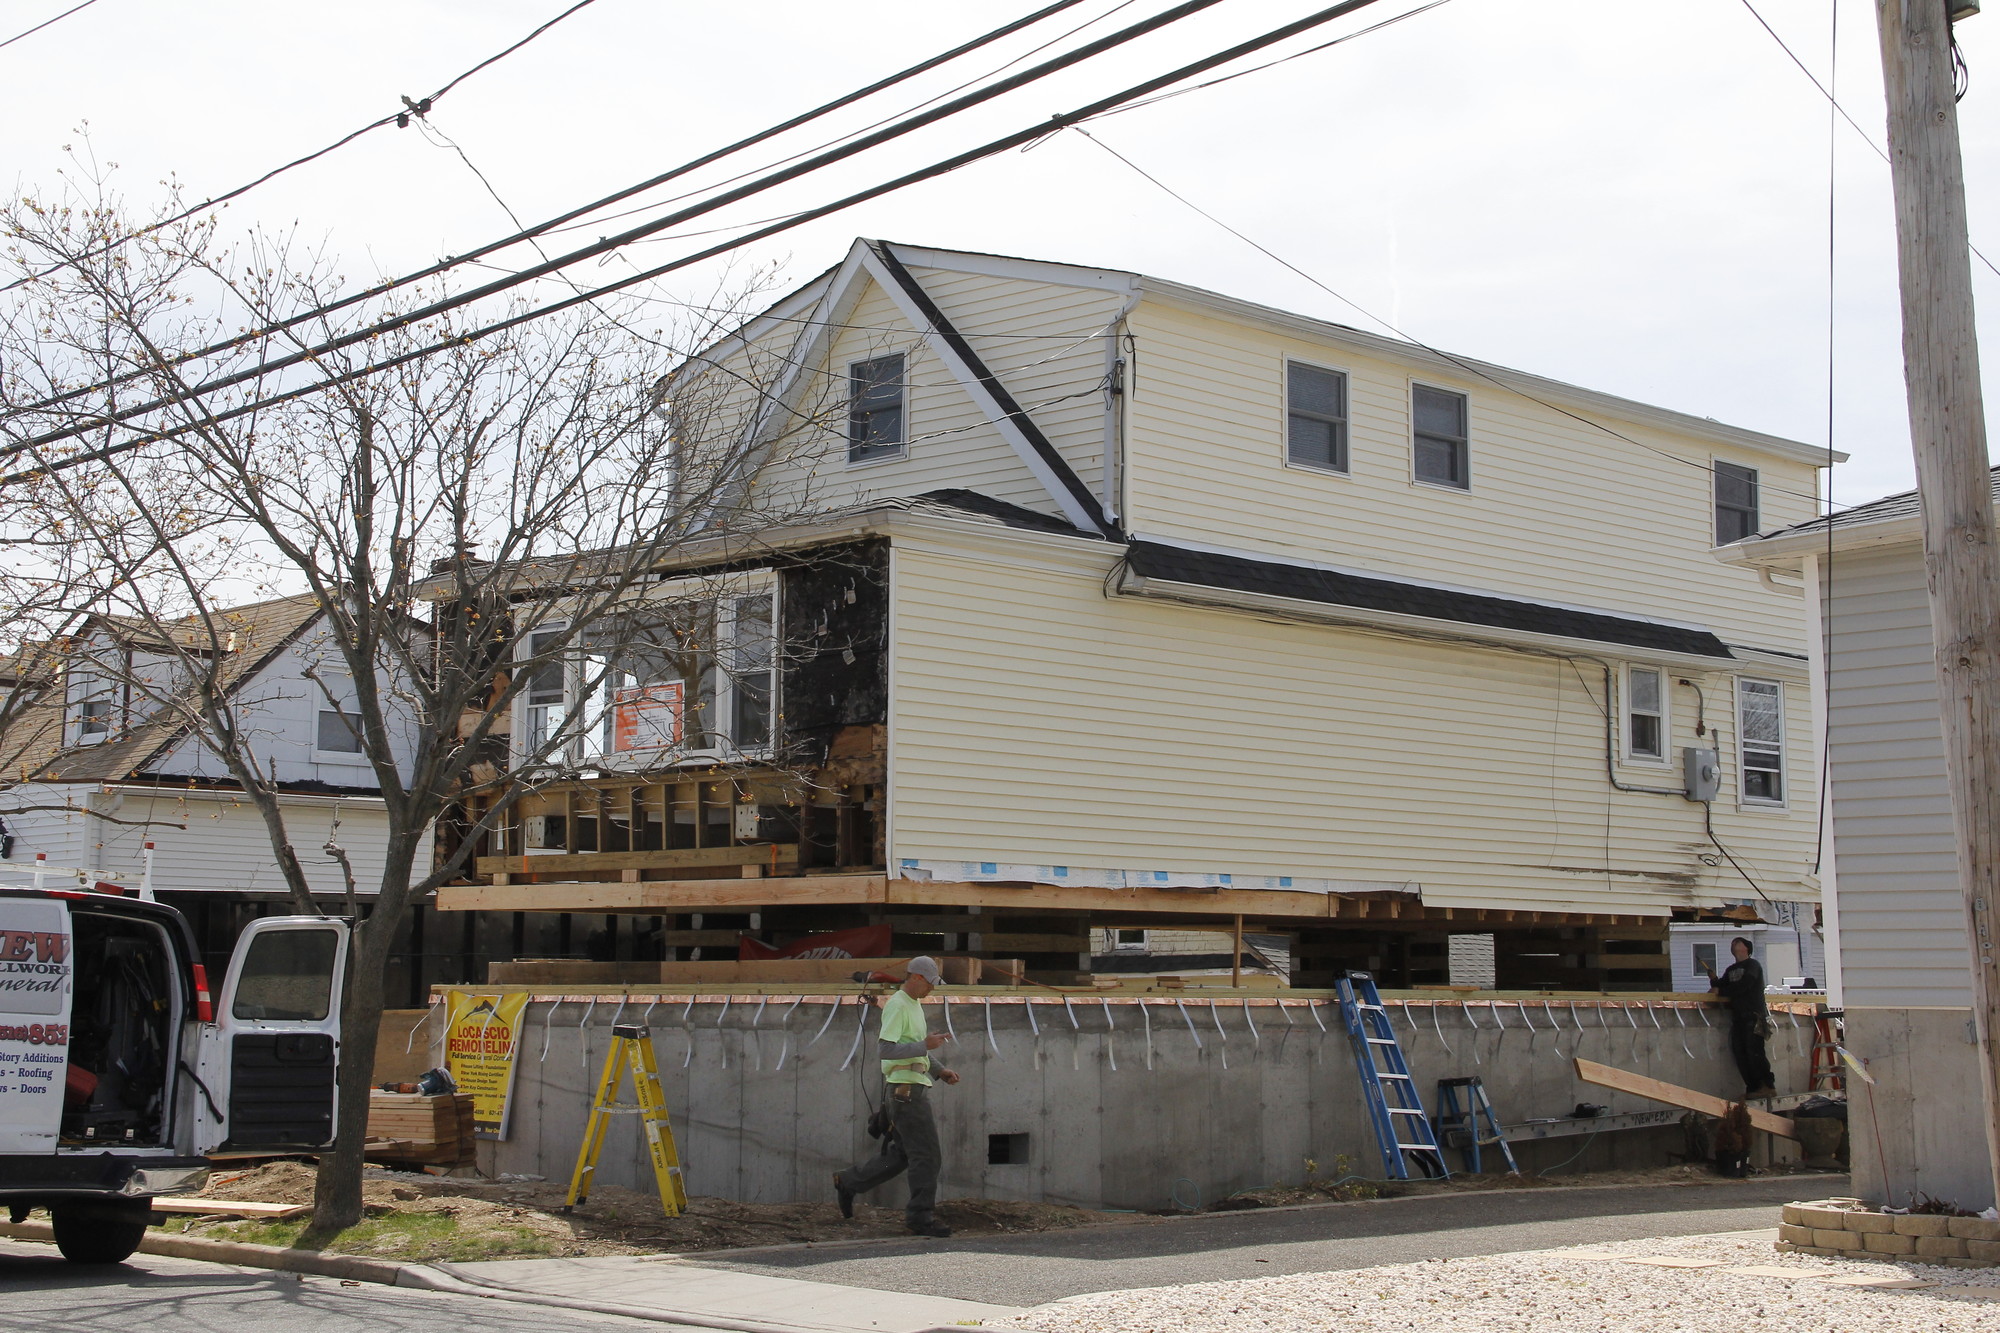 Since Hurricane Sandy, 90 West End homes have required zoning board approval to be elevated.